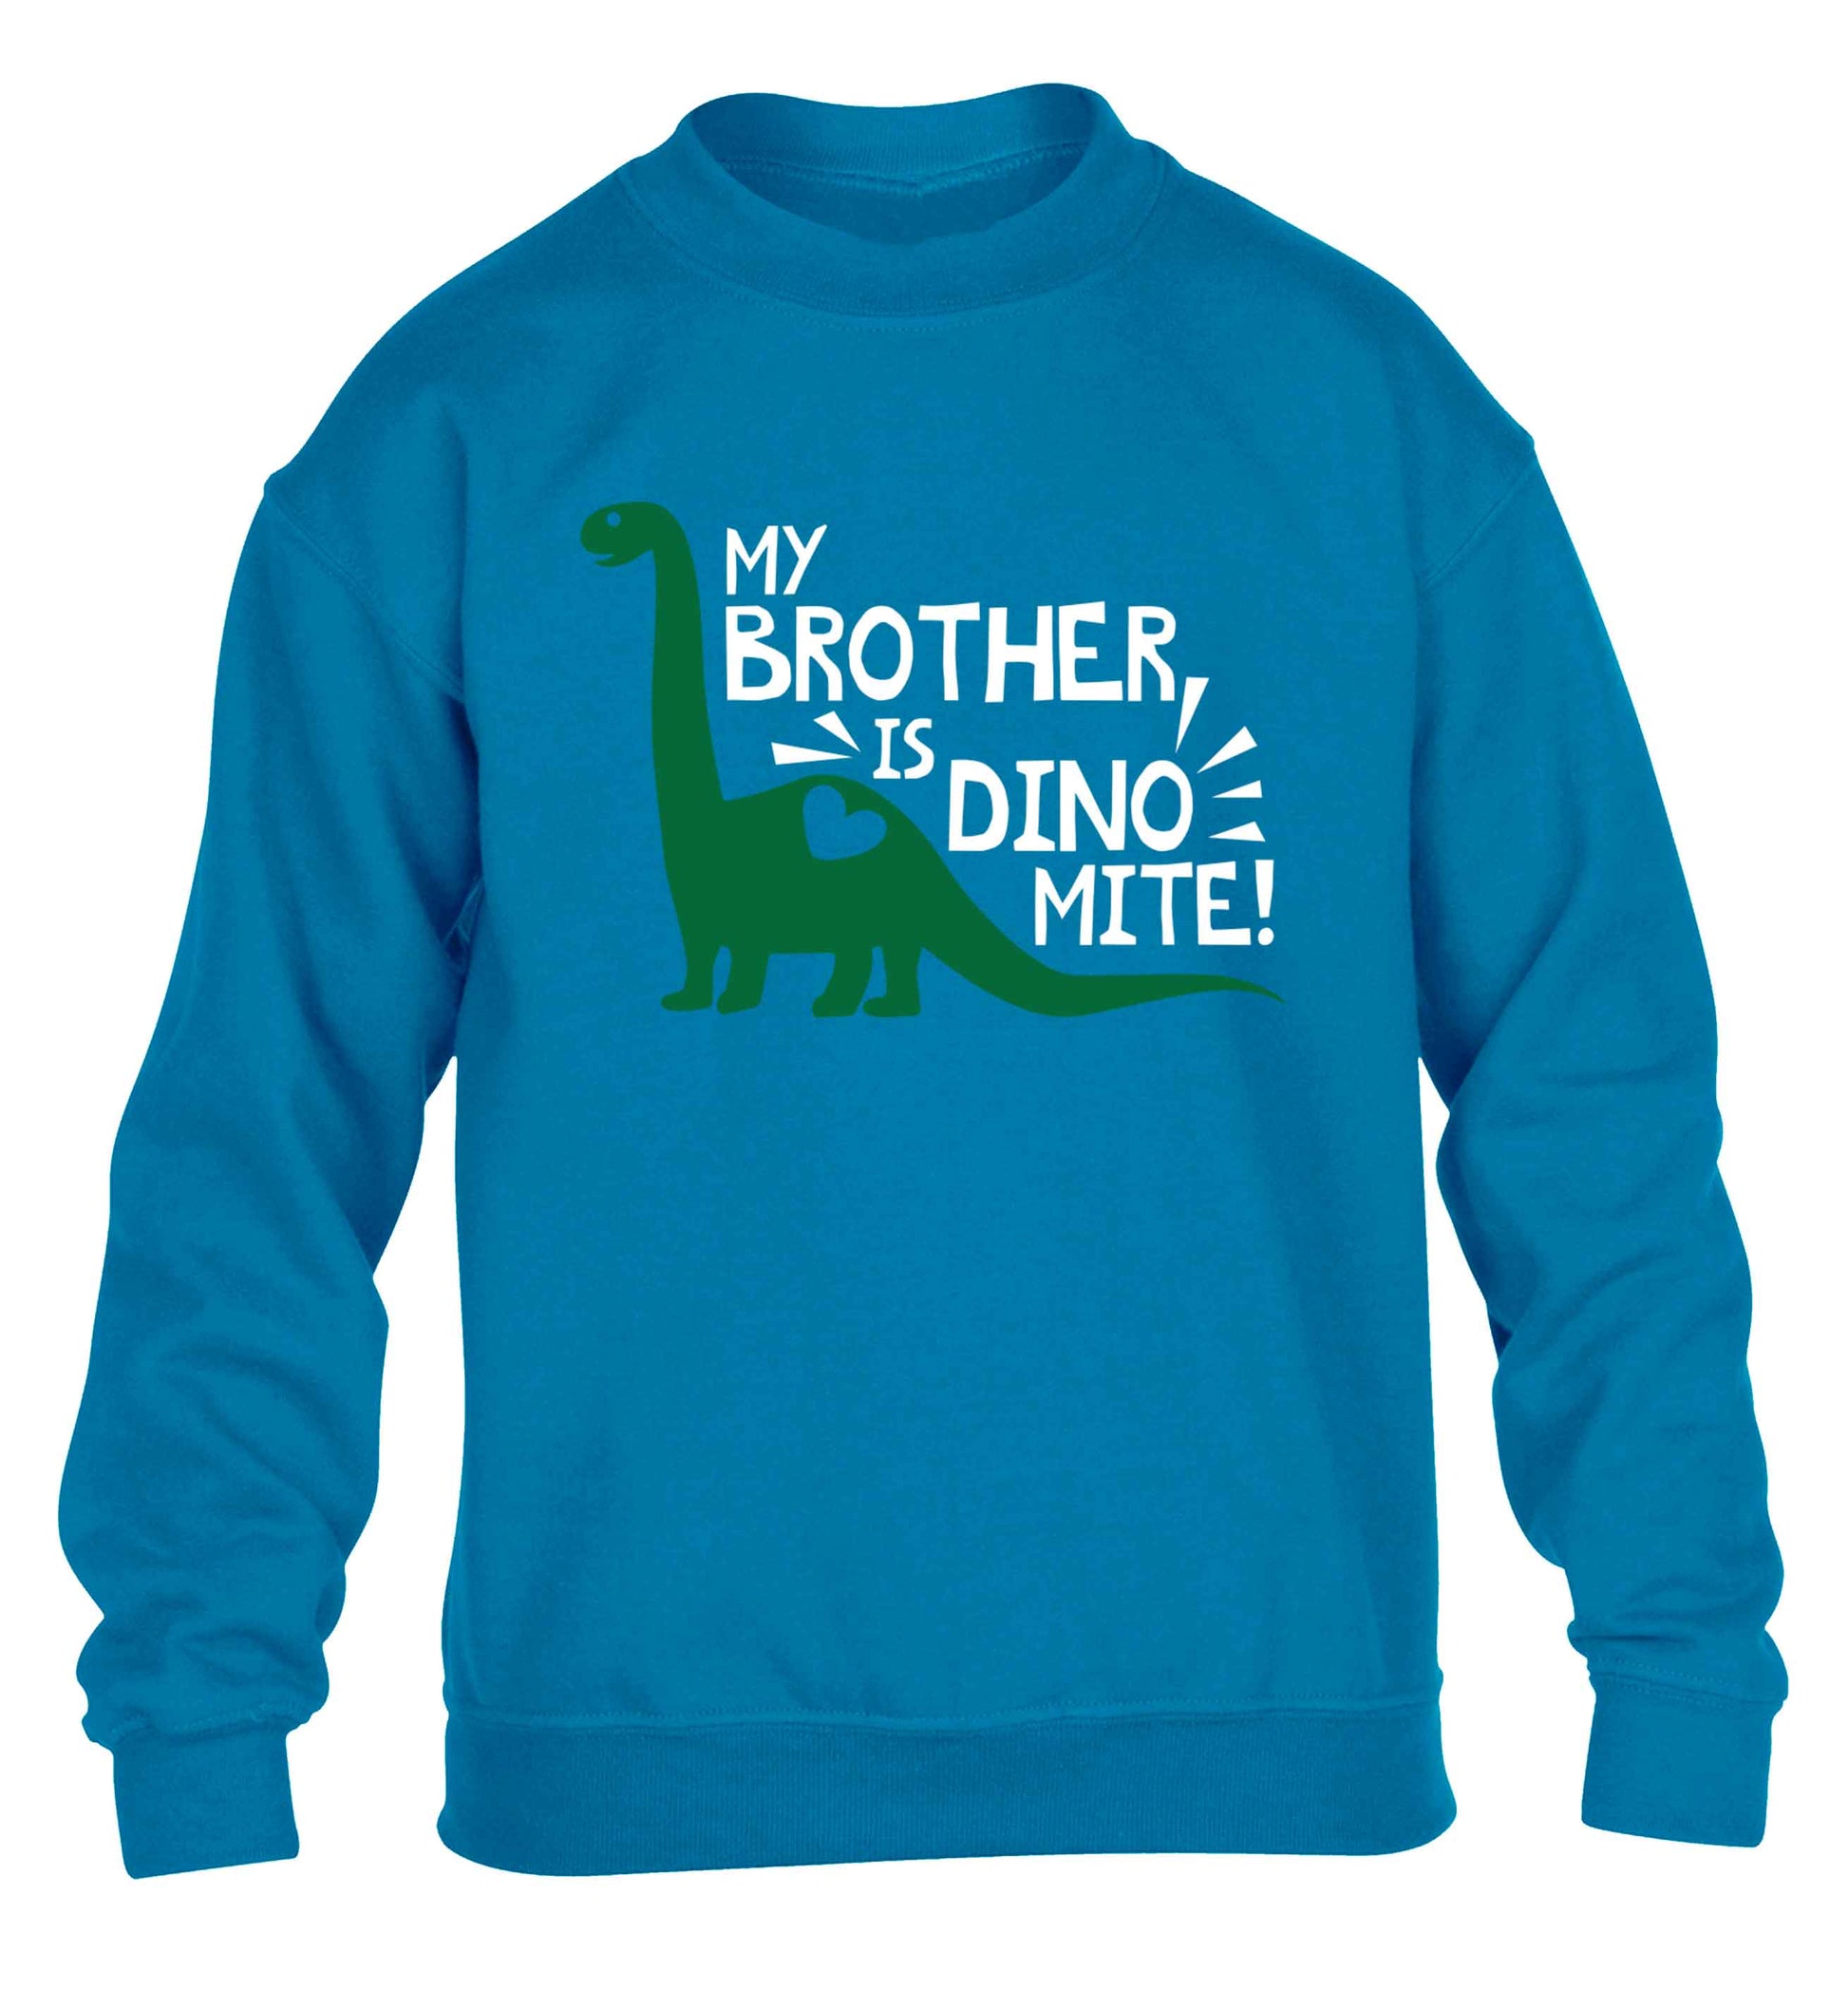 My brother is dinomite! children's blue sweater 12-13 Years